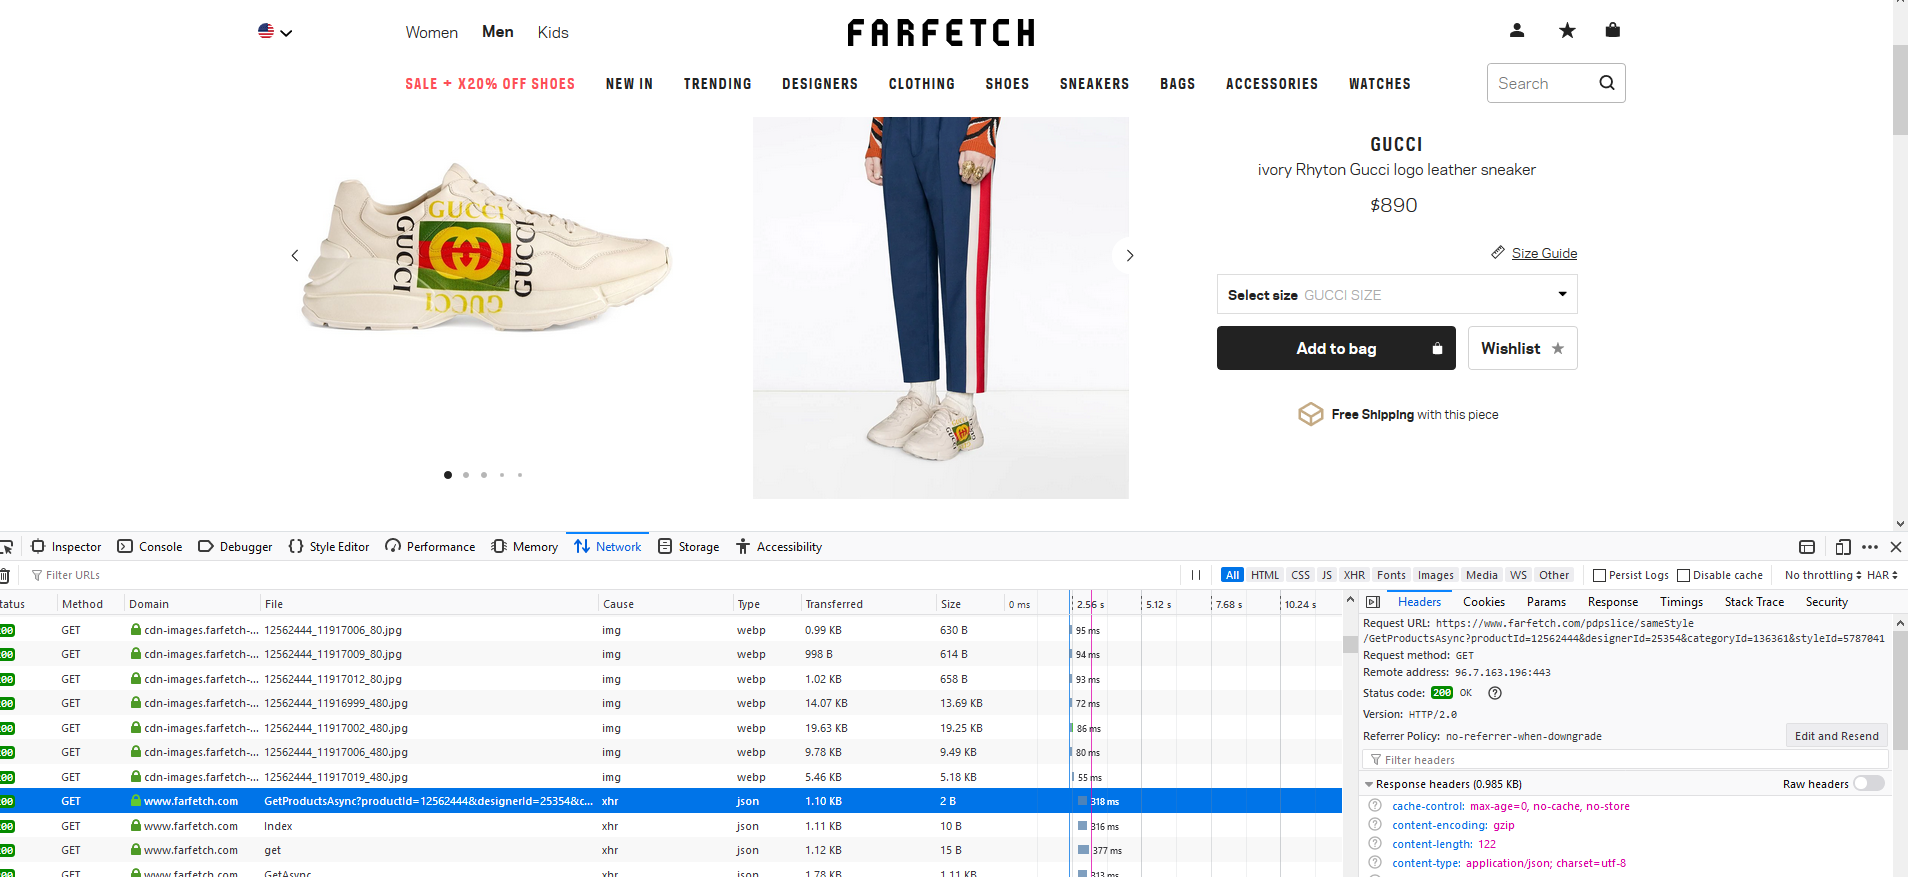 The Ultimate Farfetch Shopping Guide: Top 7 Luxury Items to